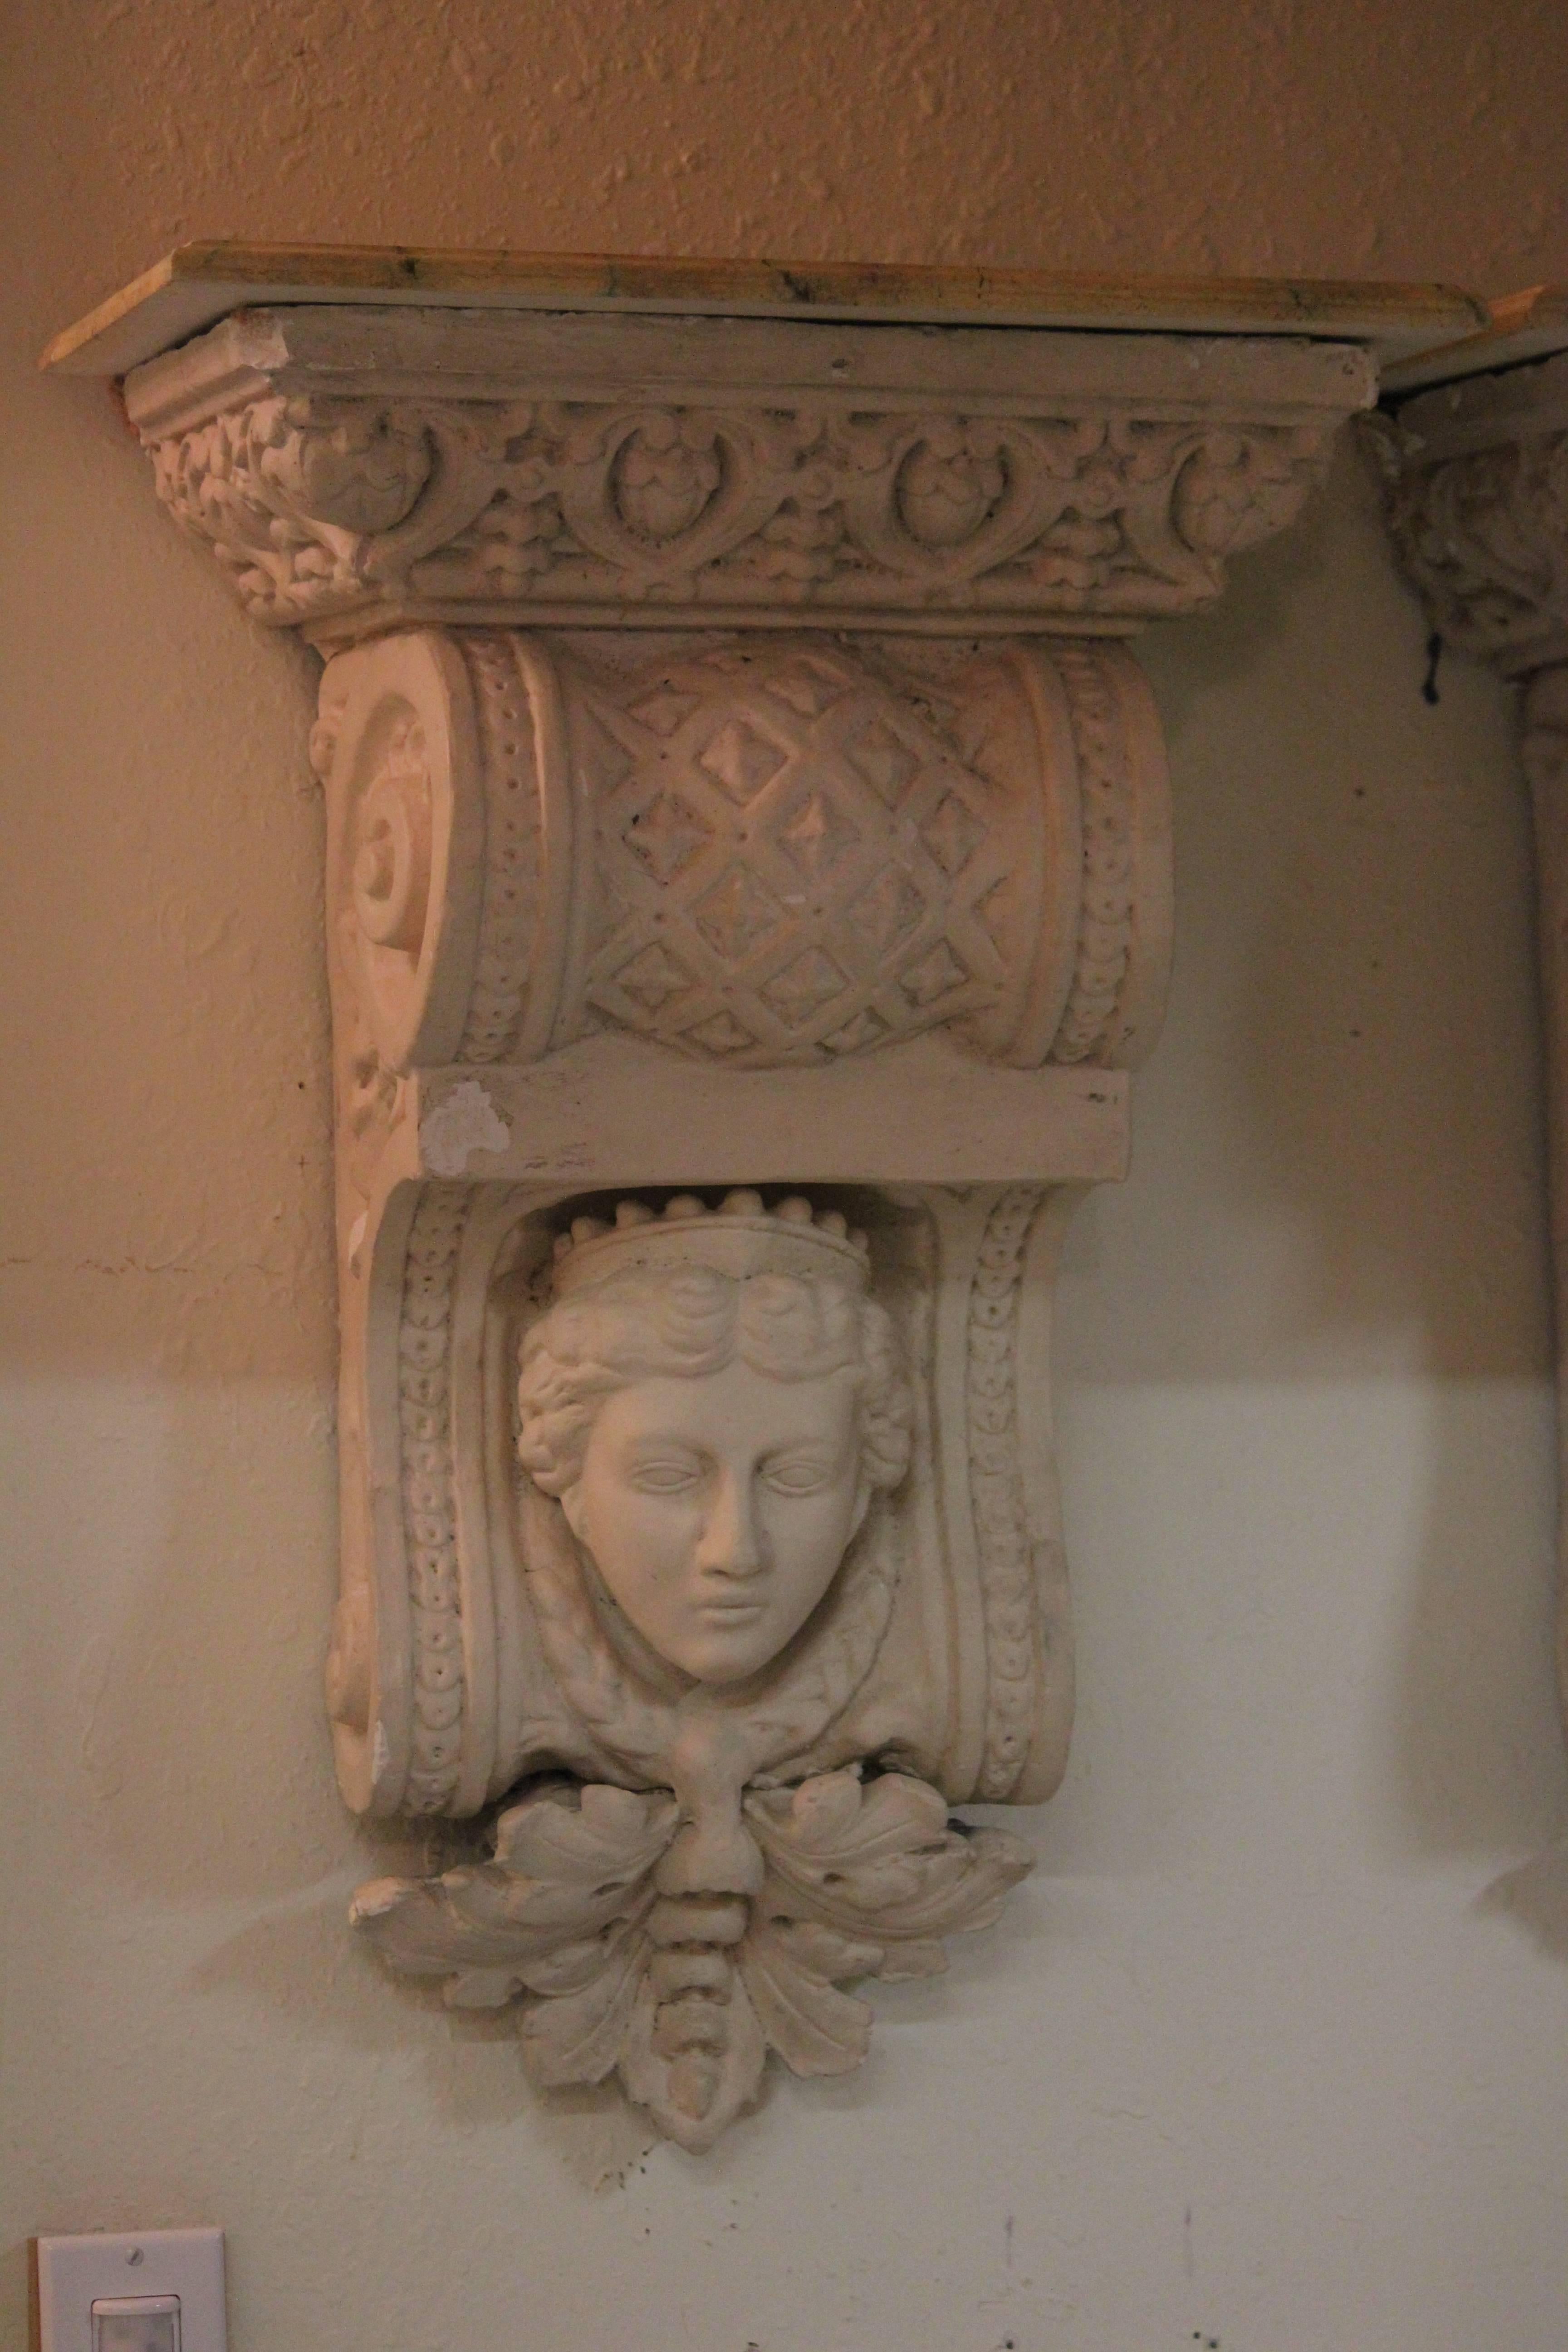 Extraordinary Vintage Very unique and gracious in form and style pair of plaster composition classical corbel Wall Brackets with faux painted wood shelf tops embellished with classical Maidens Faces..
Can be used for a wall hung console when you